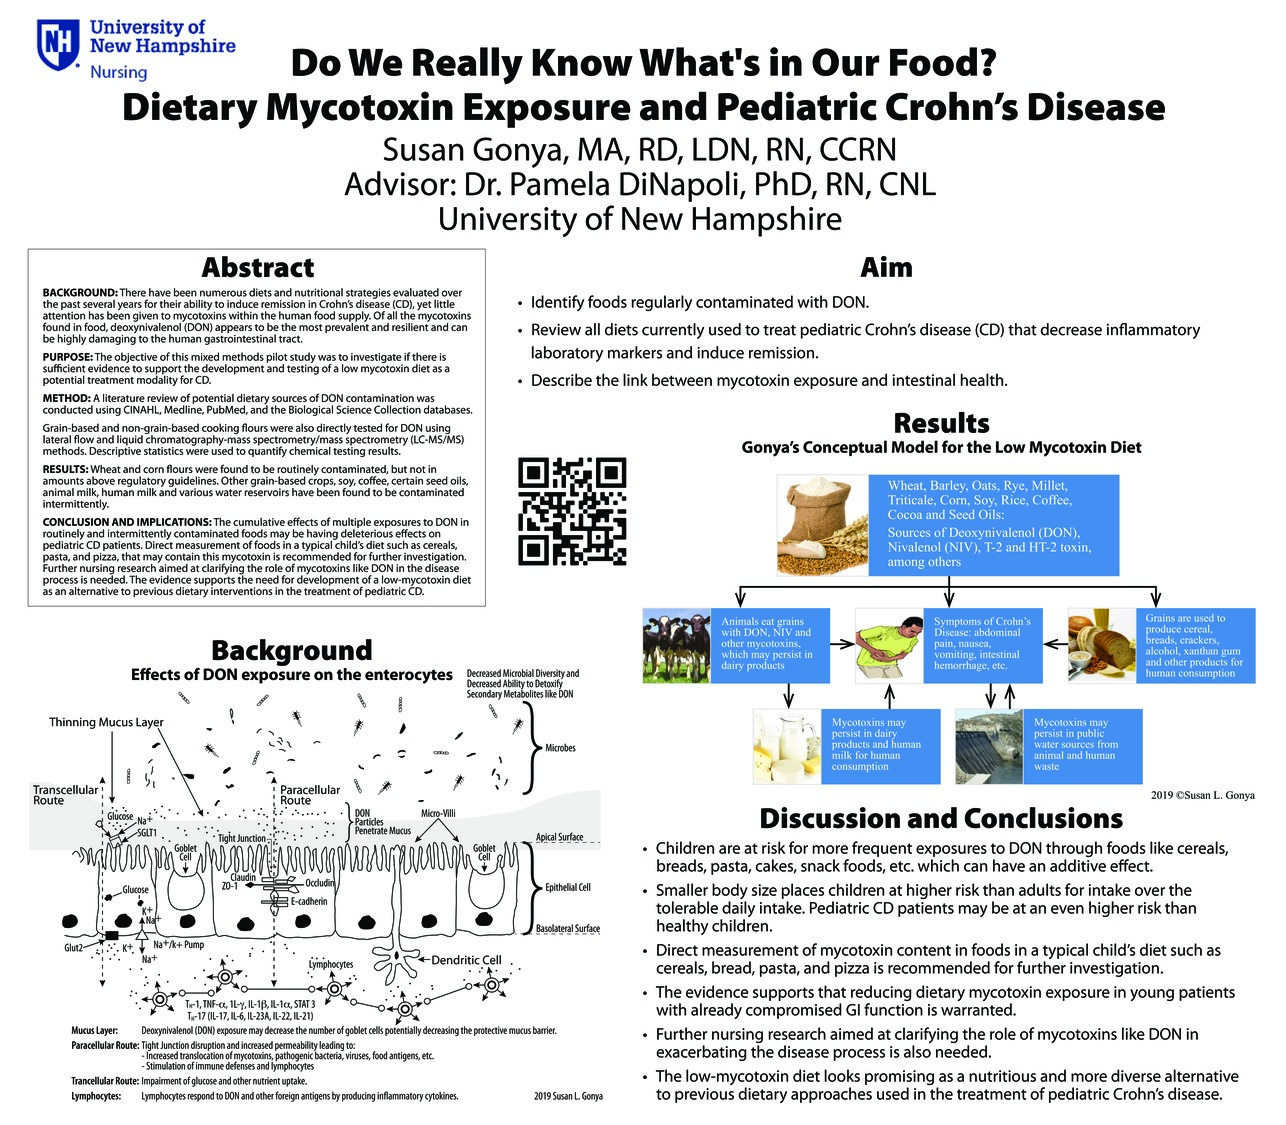 Do We Really Know What's In Our Food? Dietary Mycotoxin Exposure And Pediatric Crohn’S Disease by sgonya